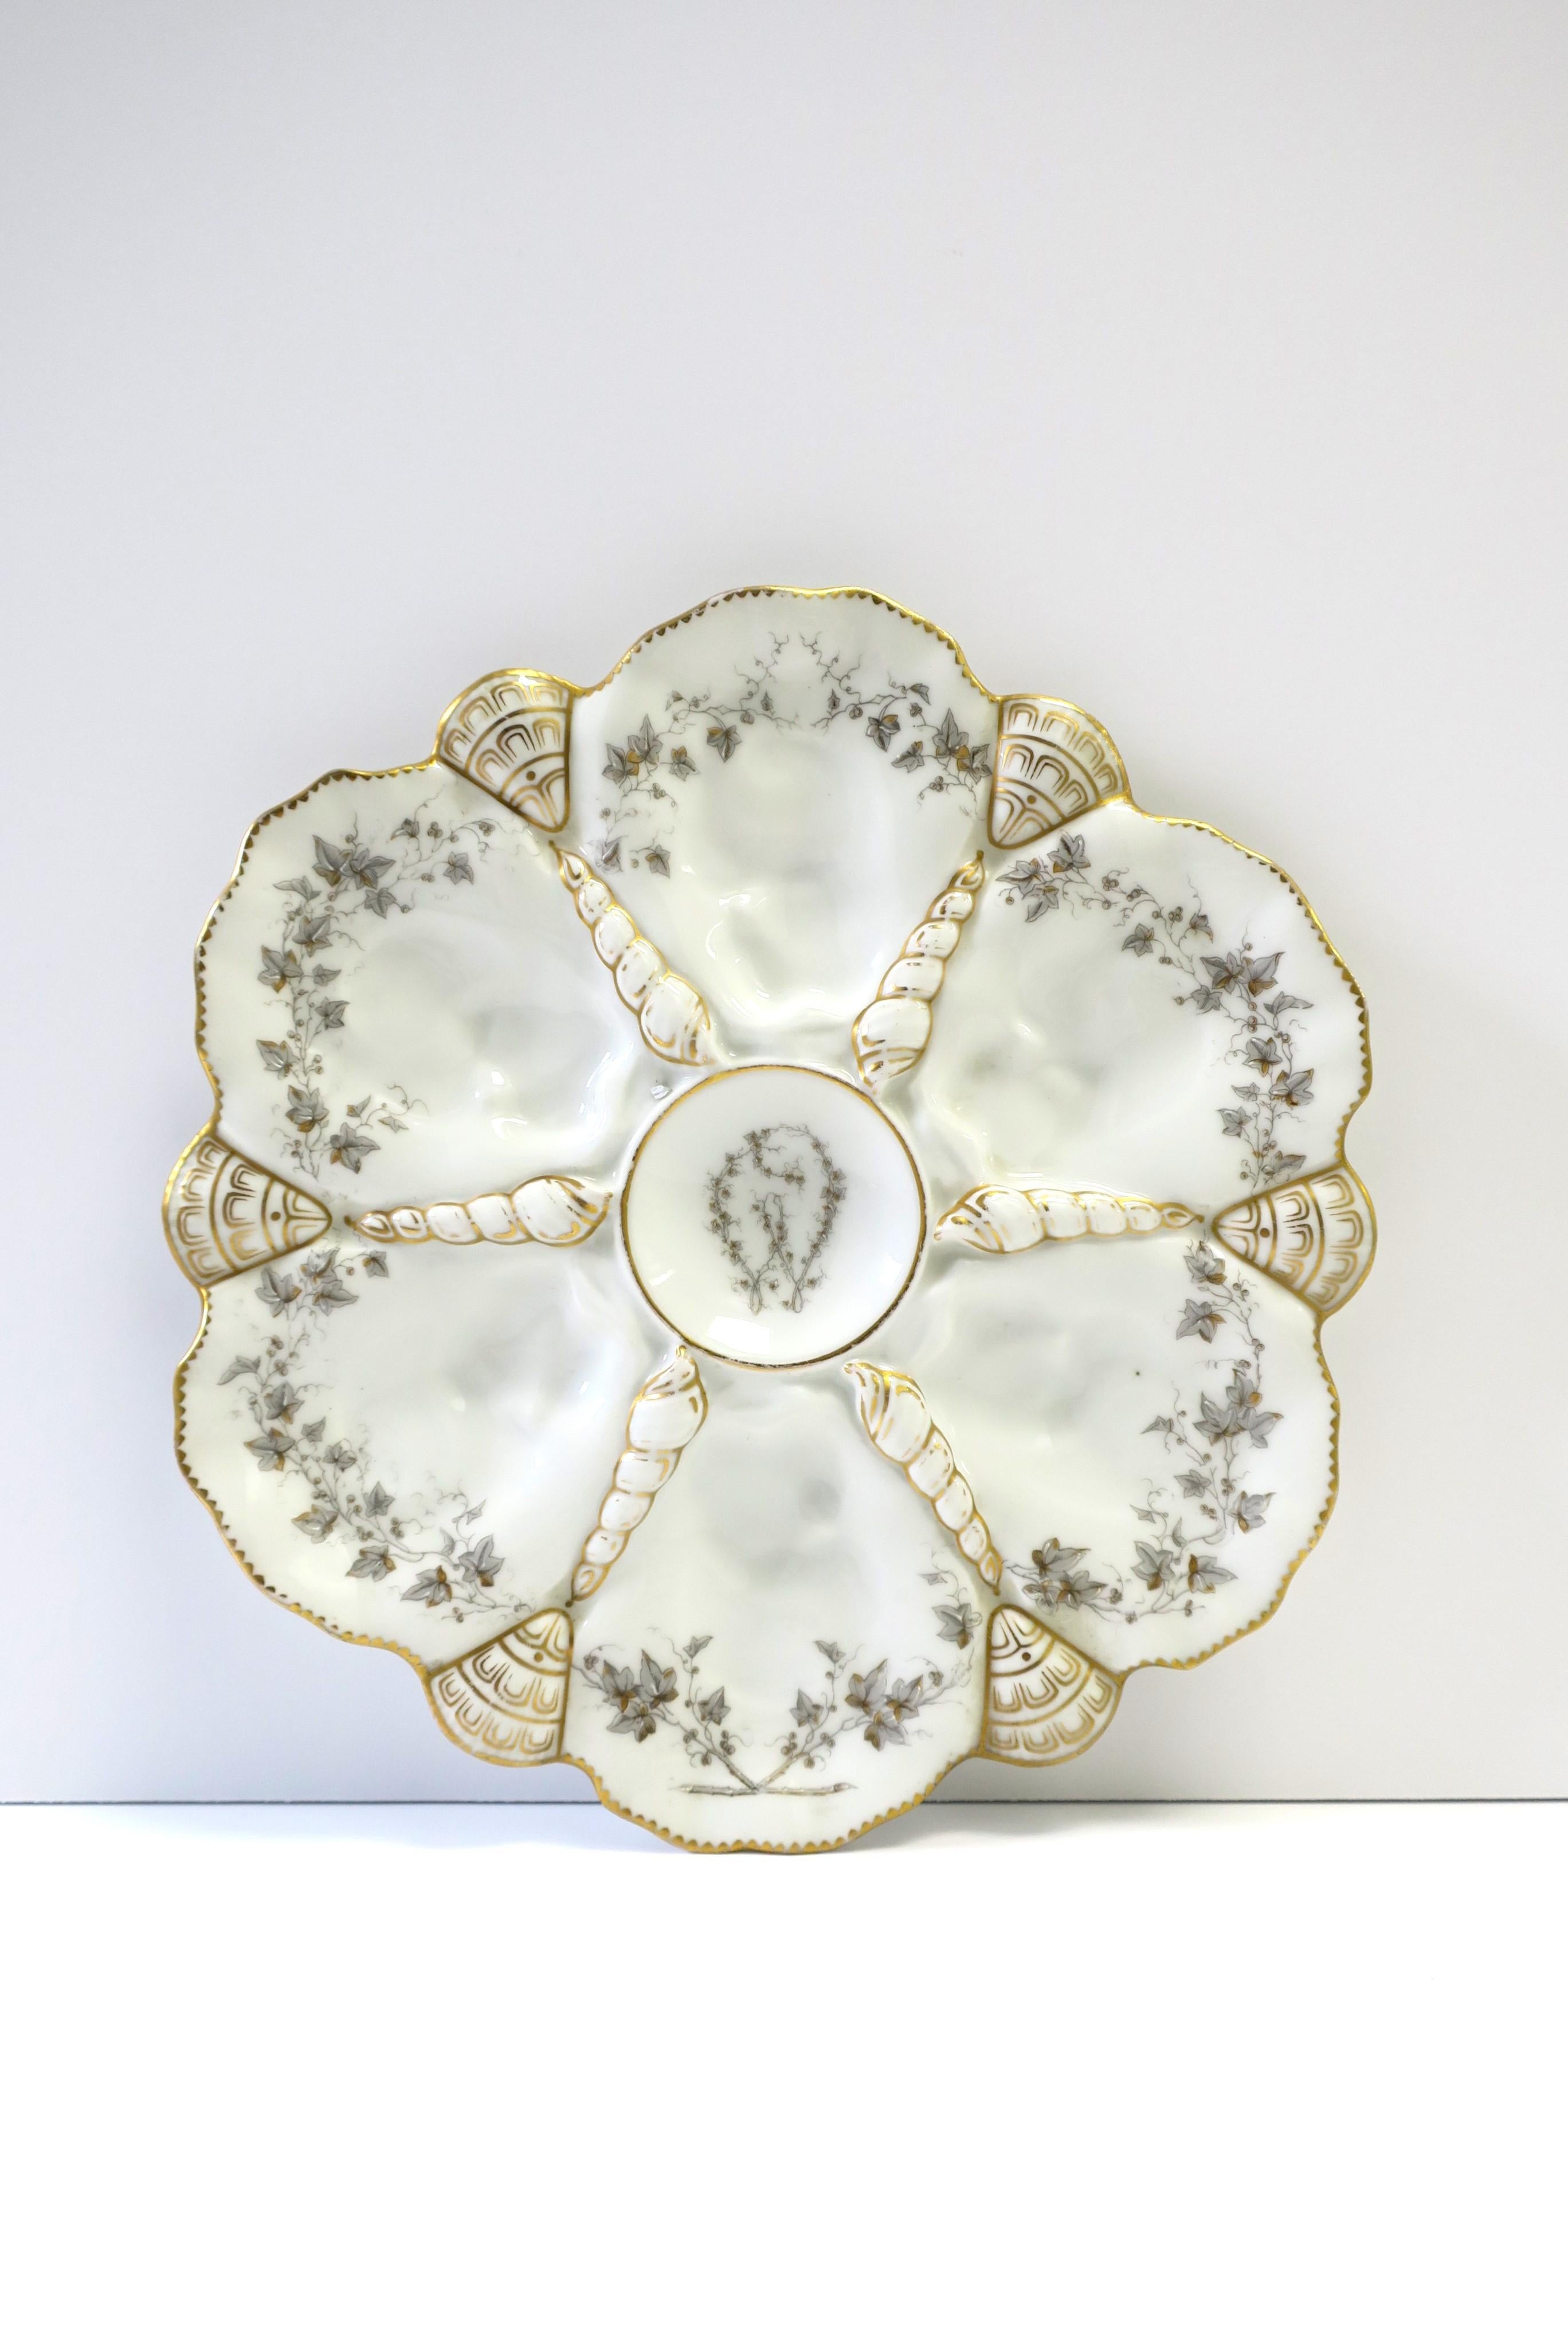 A French white porcelain oyster plate with seashell design and gold gilt detail, circa ealry-20th century, France. A beautiful plate to hold oysters or hang as wall art. Maker's mark on underside as shown, 'Mansard 34 Rue Paradis,